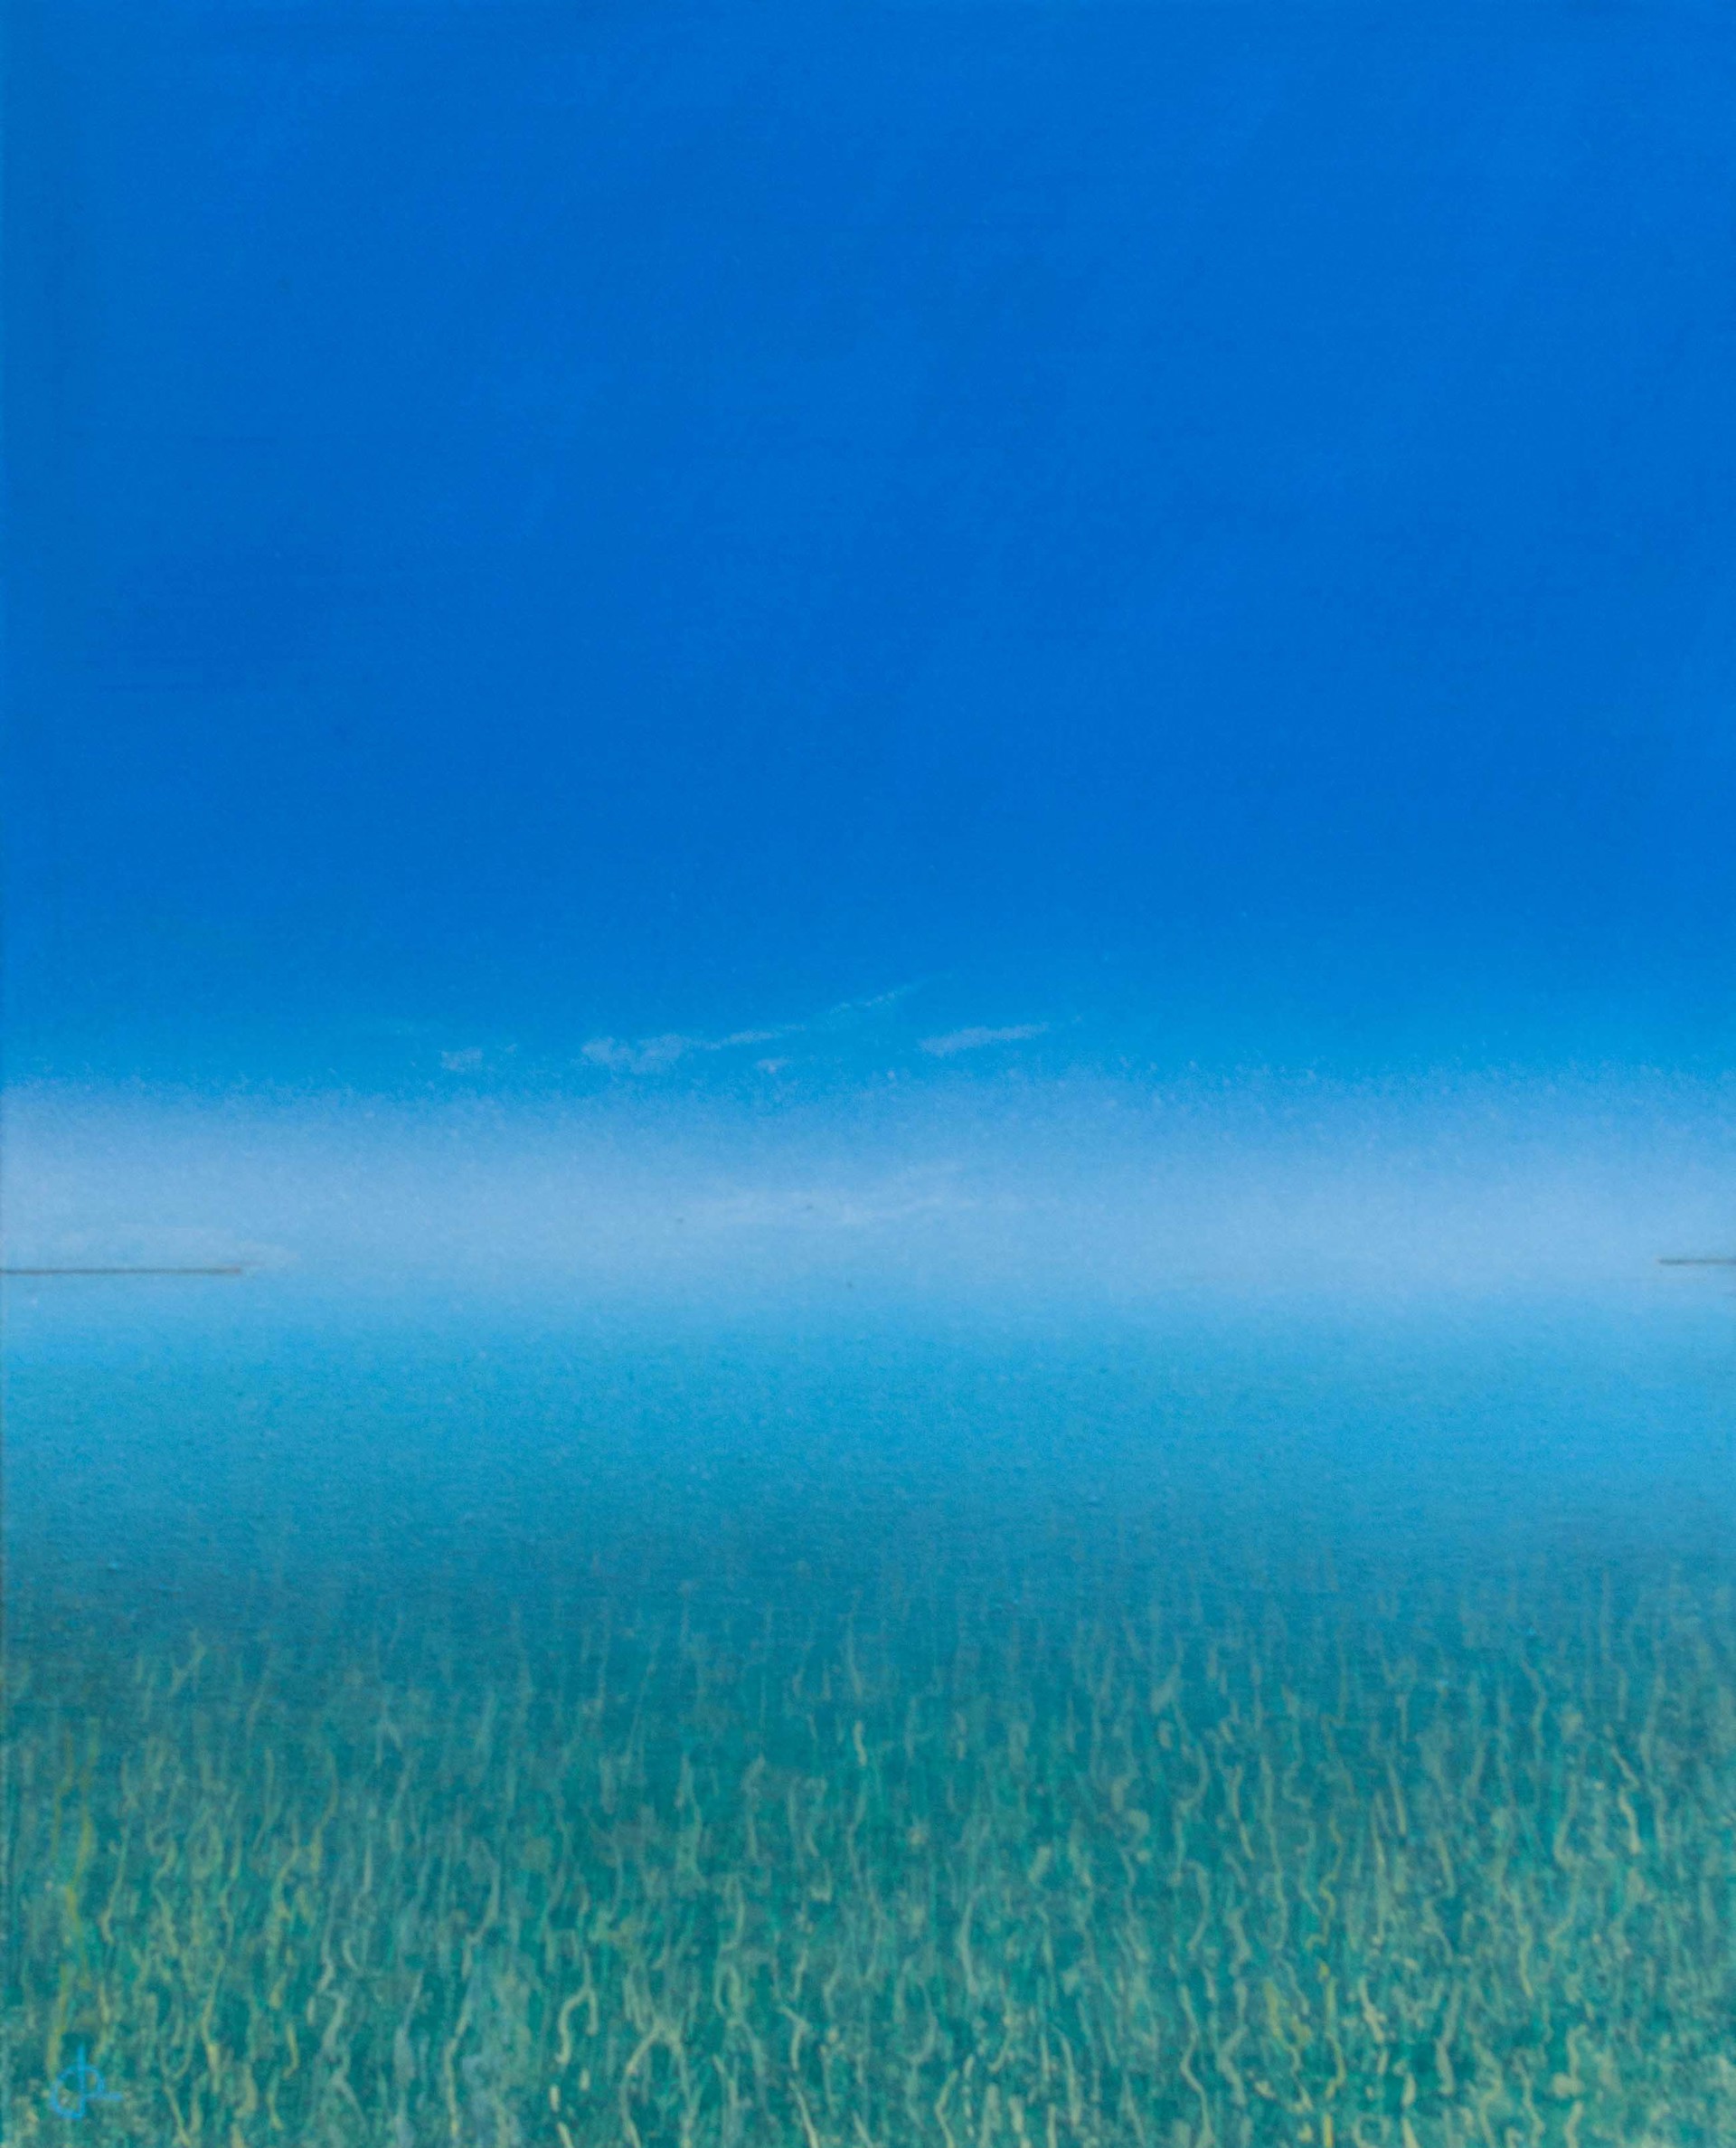 Seagrass by Peter Laughton